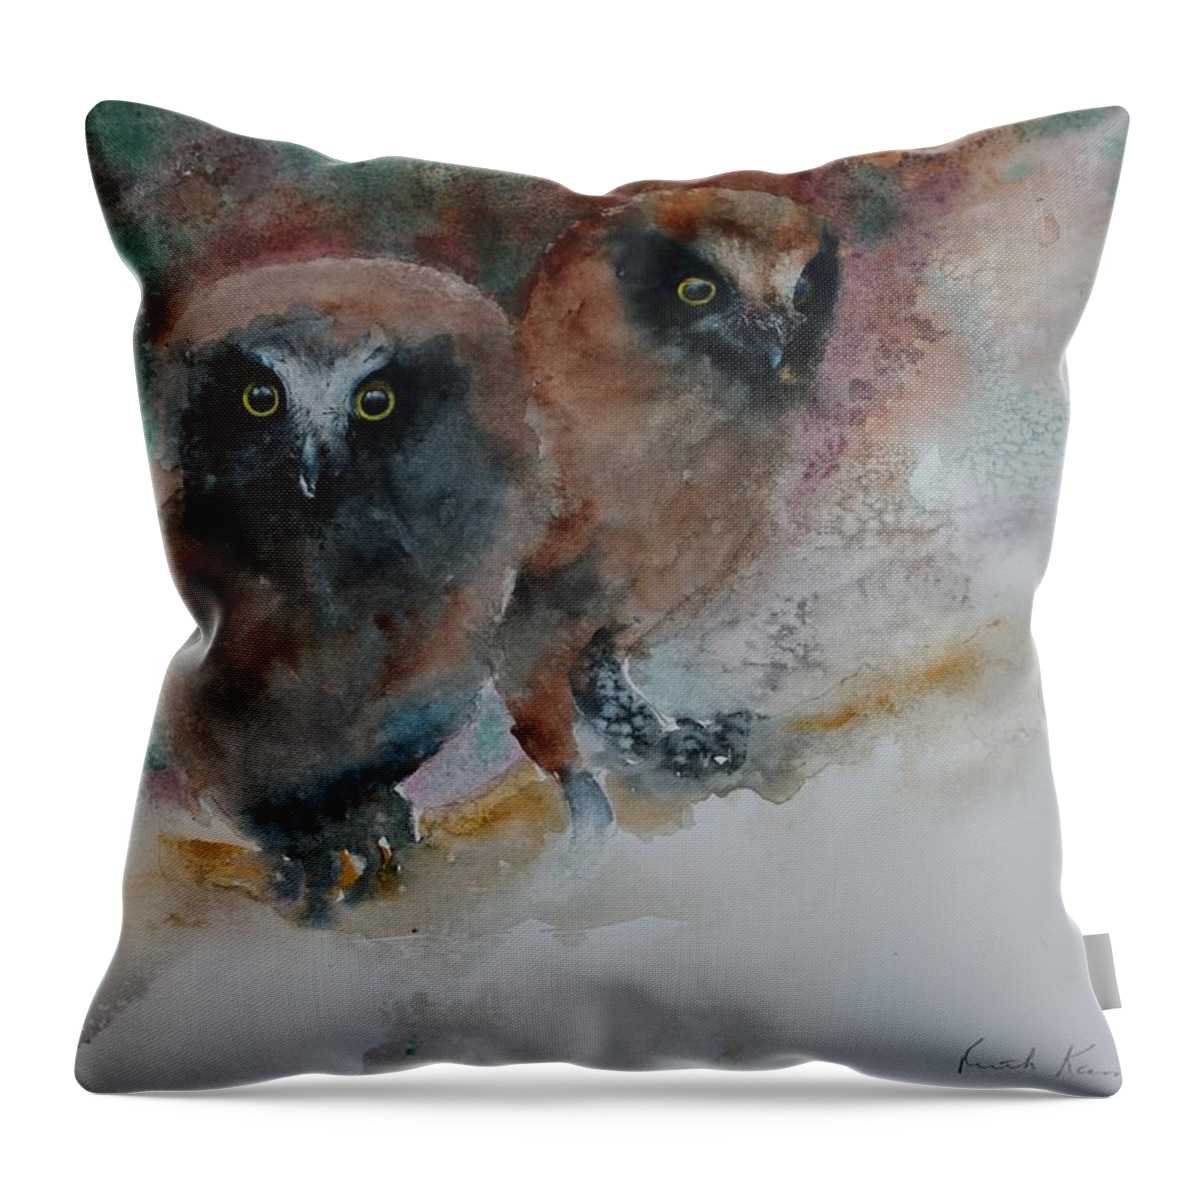 Owls Throw Pillow featuring the painting Two Hoots by Ruth Kamenev